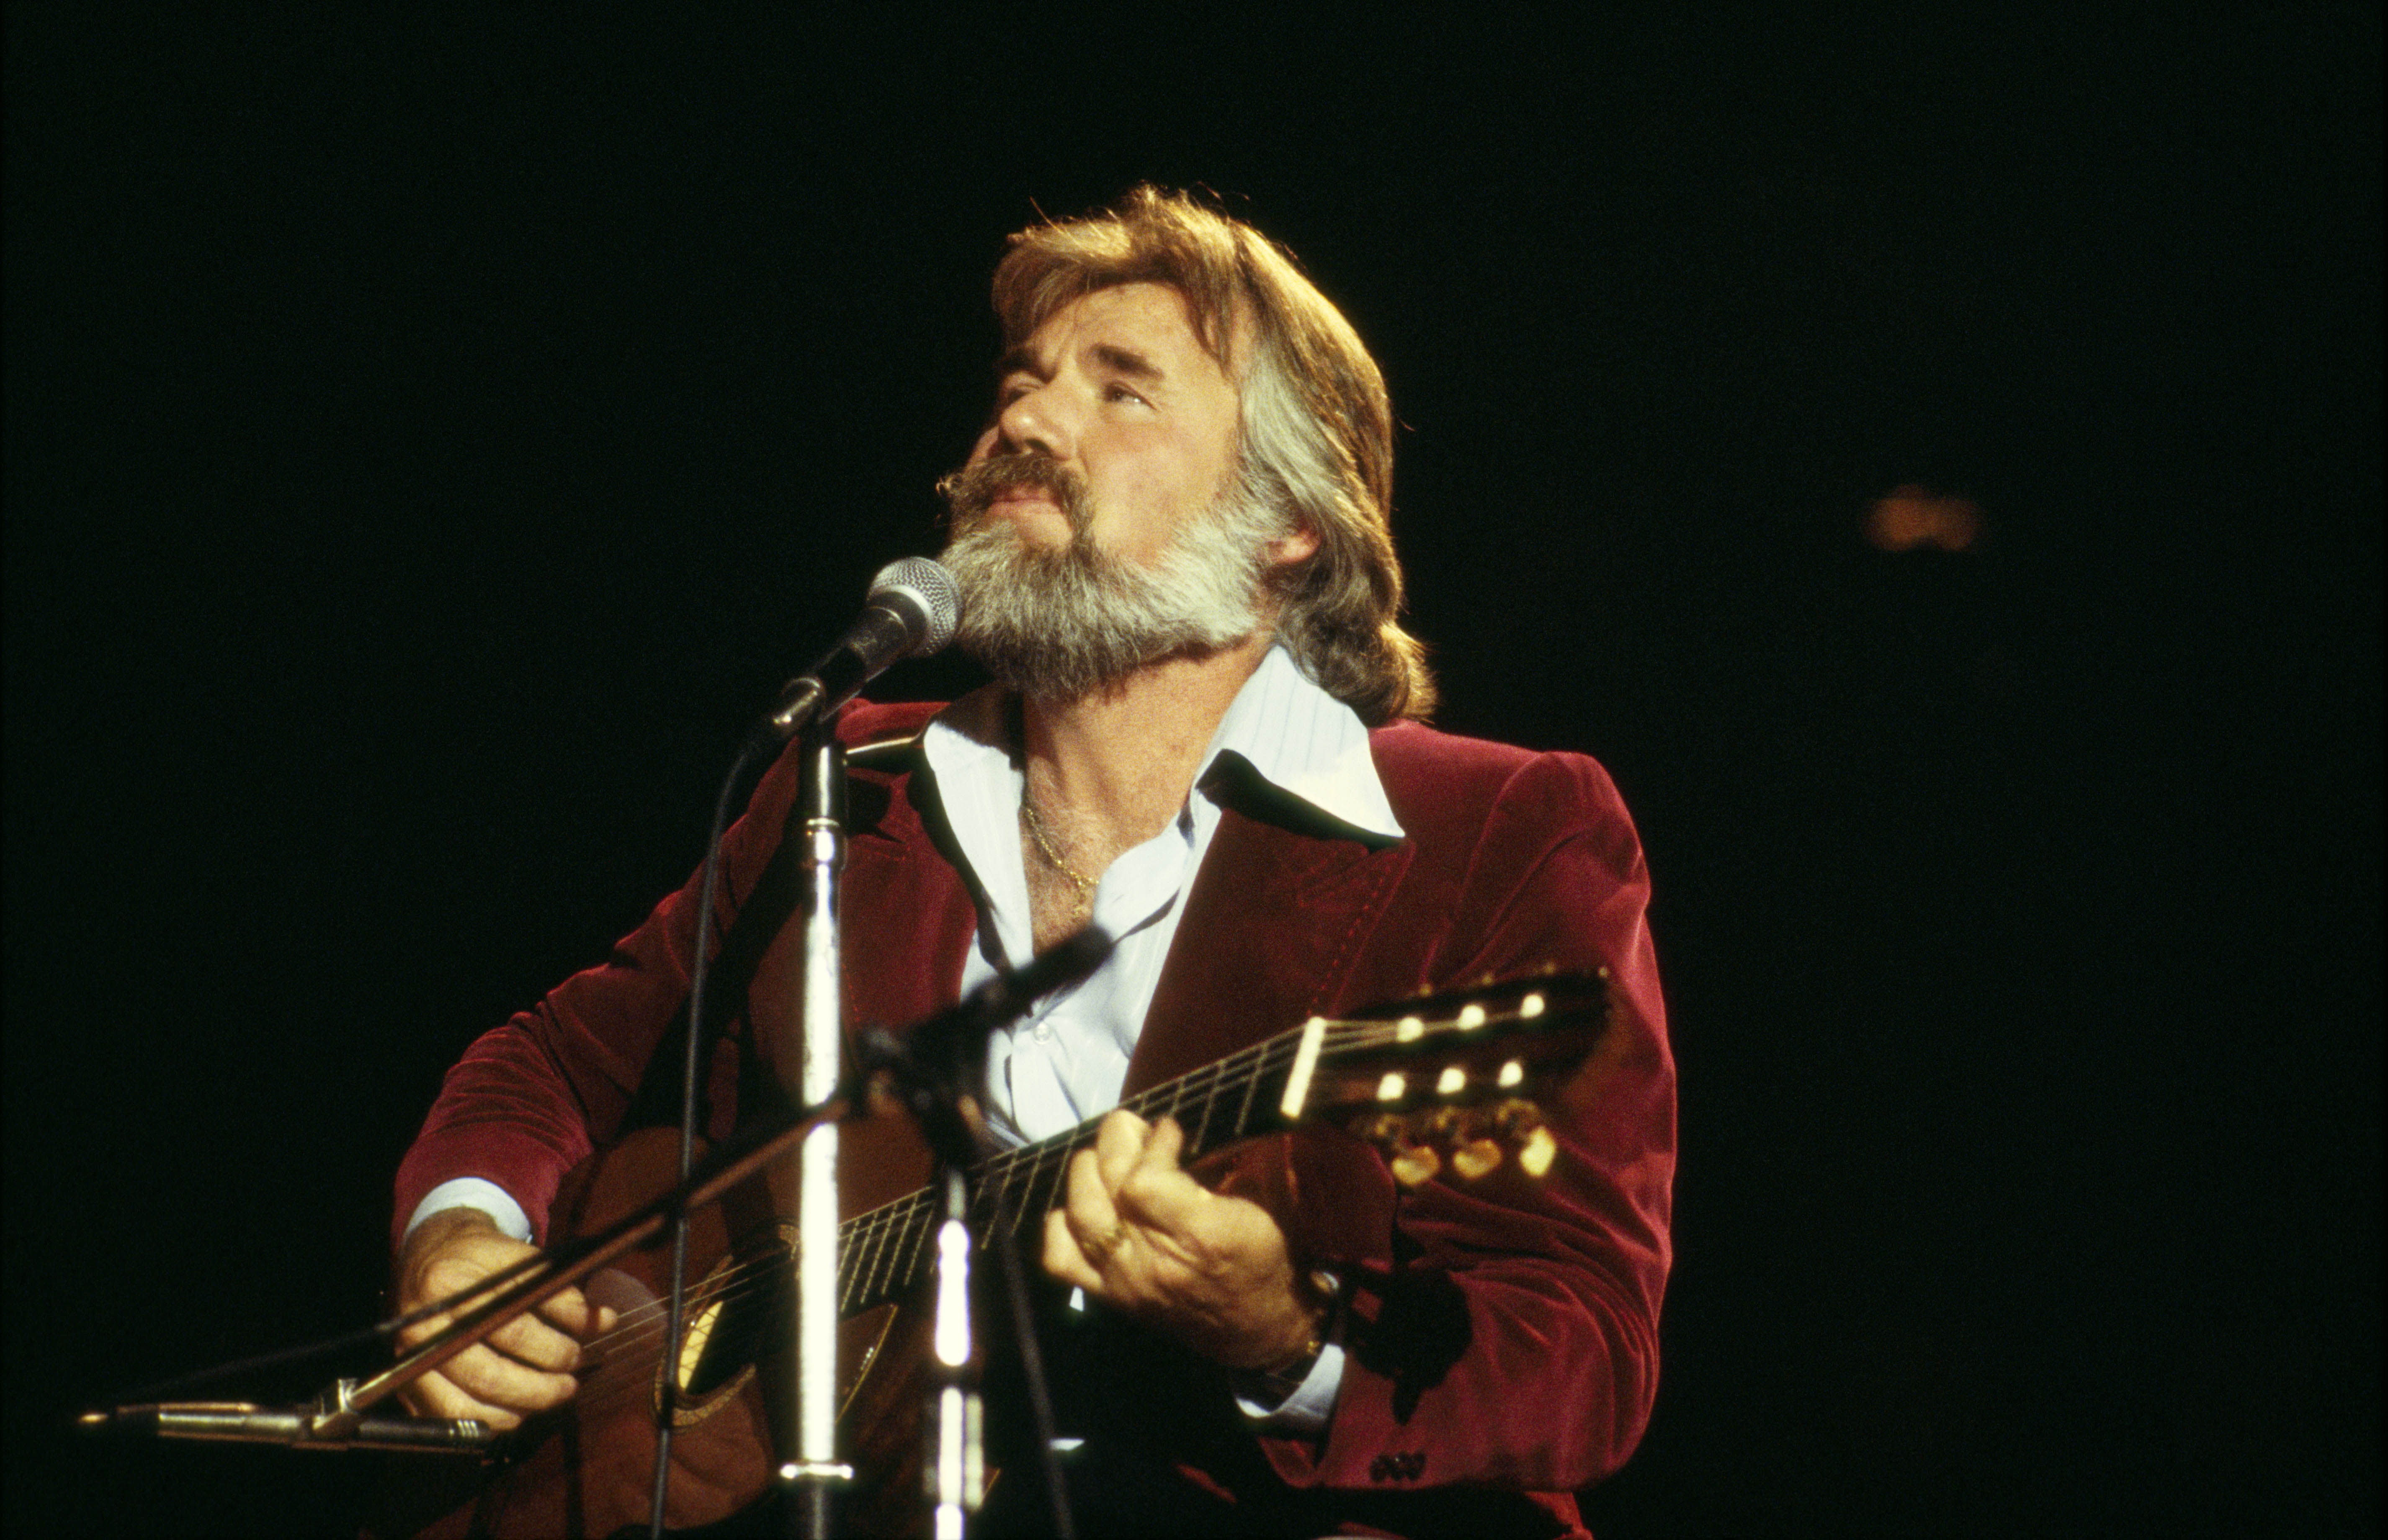 Kenny Rogers performing on stage while playing the guitar wearing a velvet blazer paired with a shirt in 1978. / Source: Getty Images